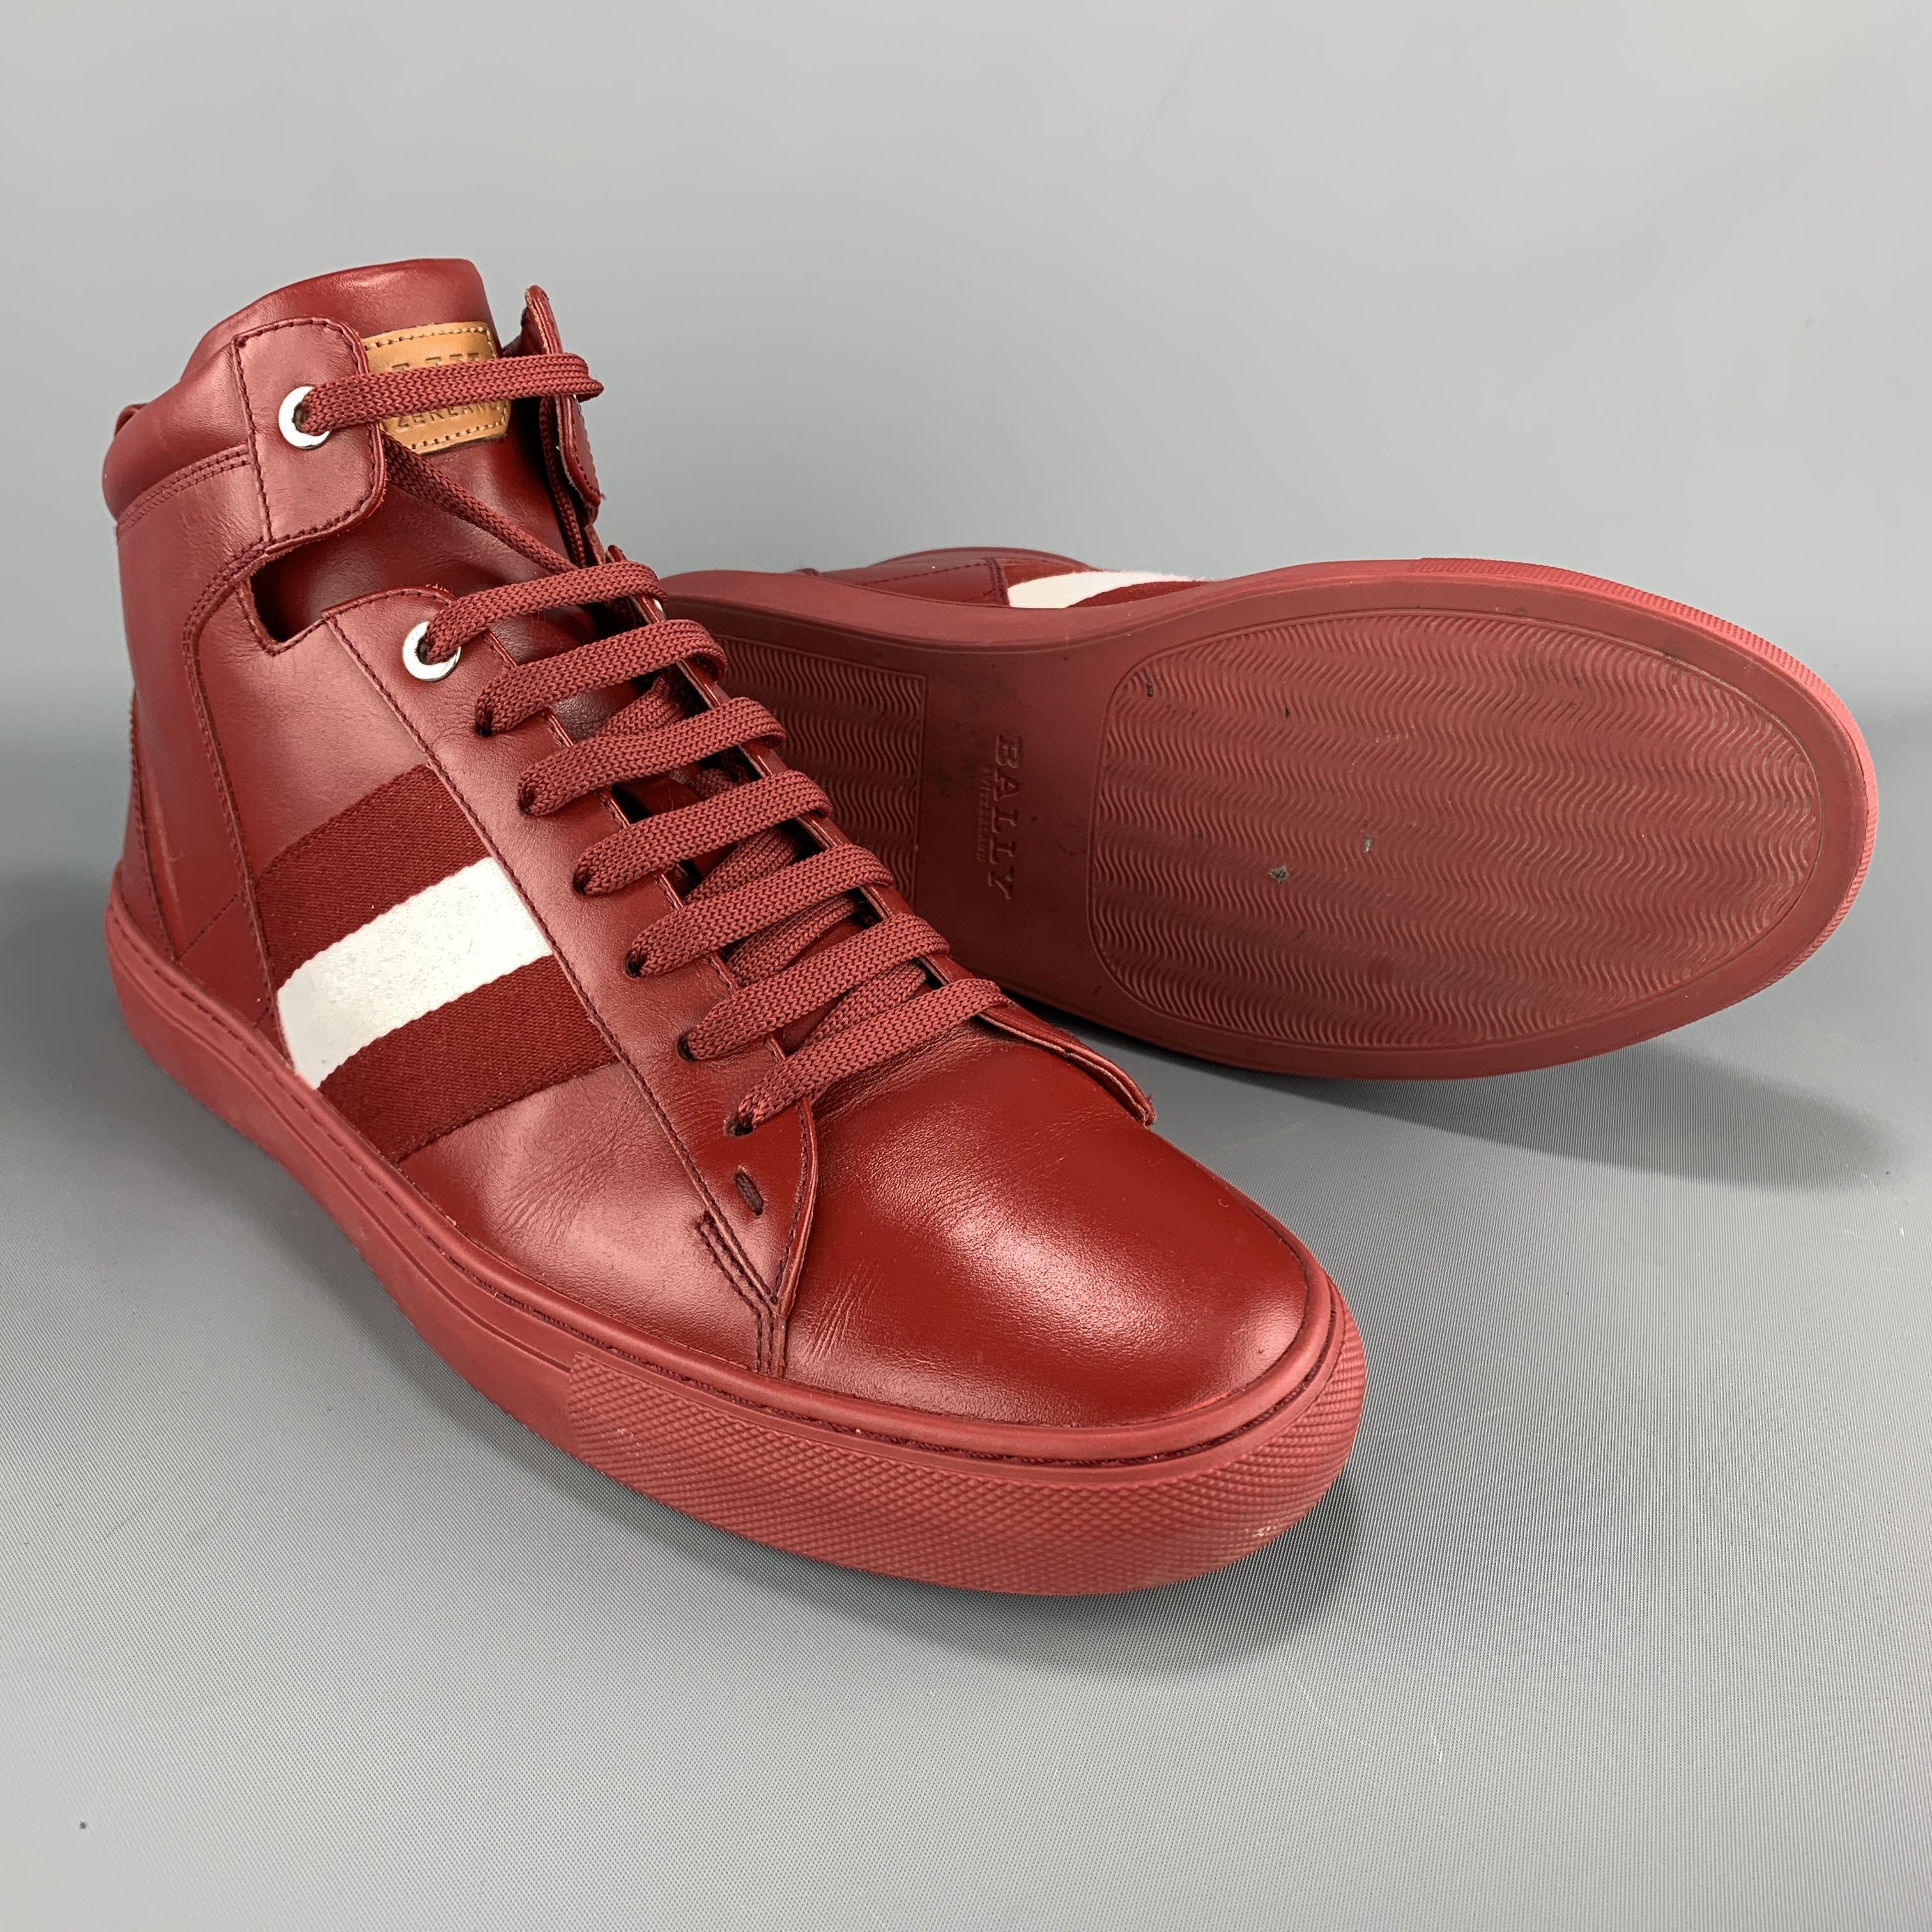 burgundy leather sneakers